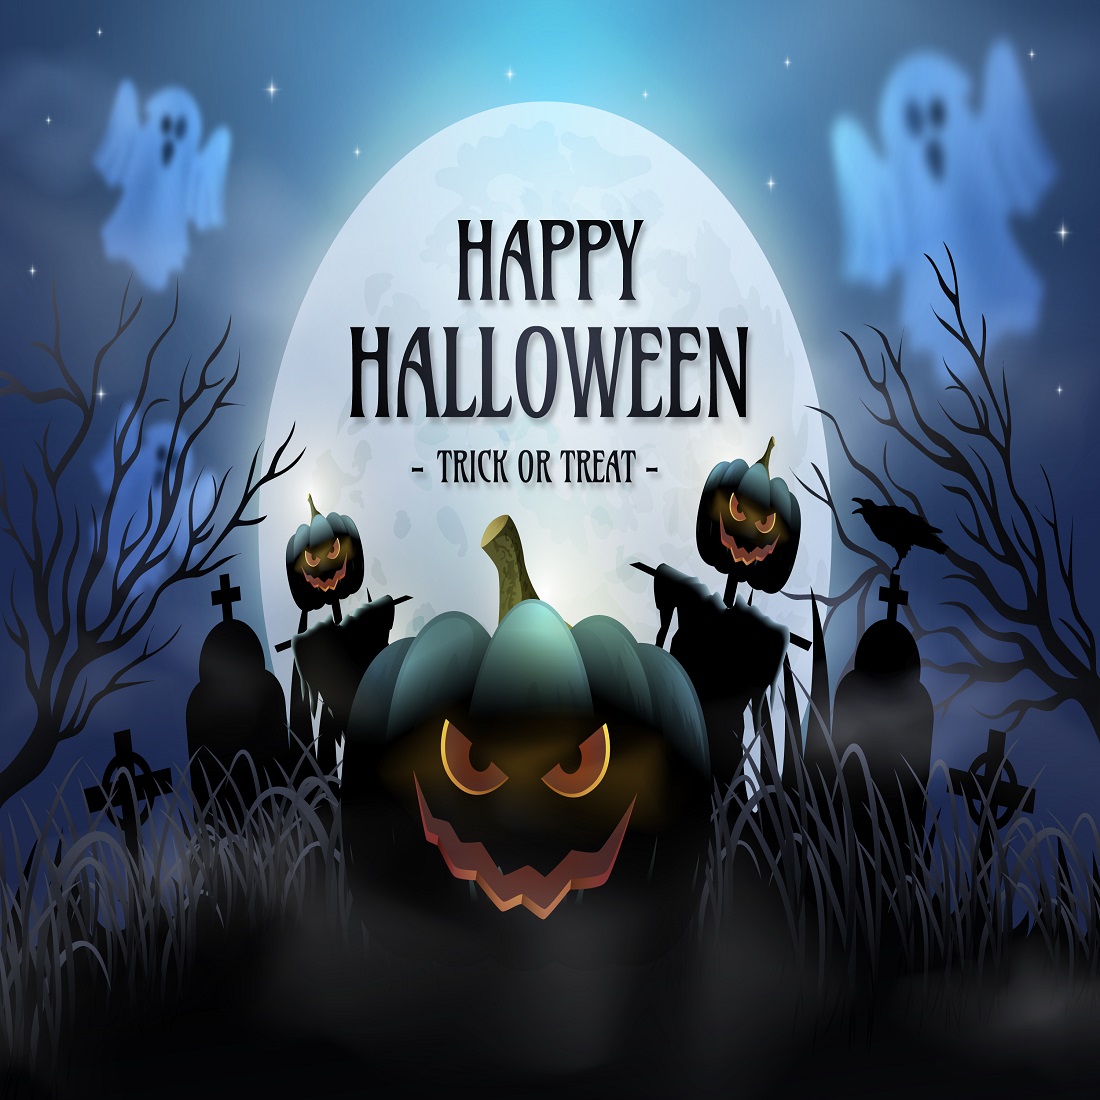 Halloween celebration background preview image.